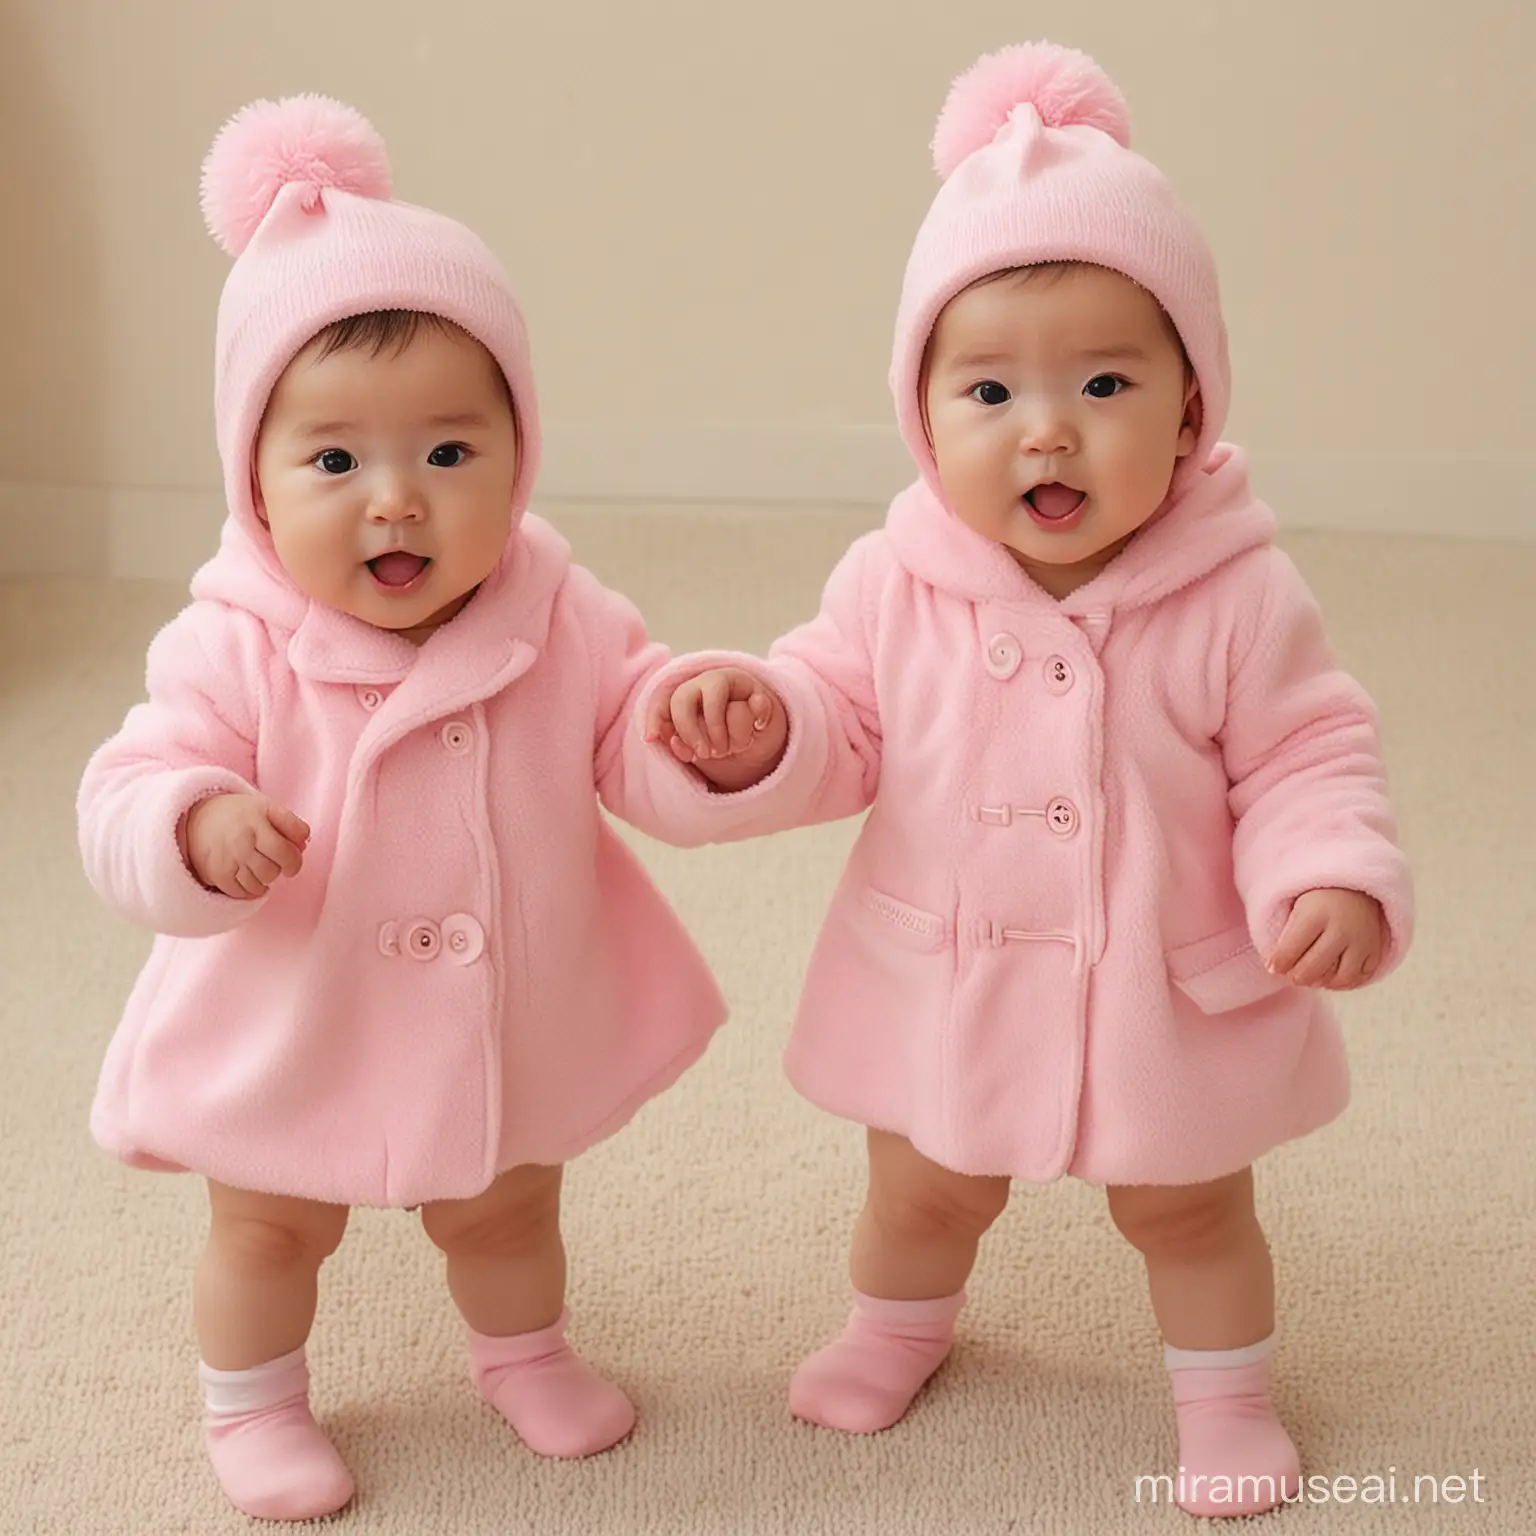 Adorable Korean Twin Babies in Matching Outfits